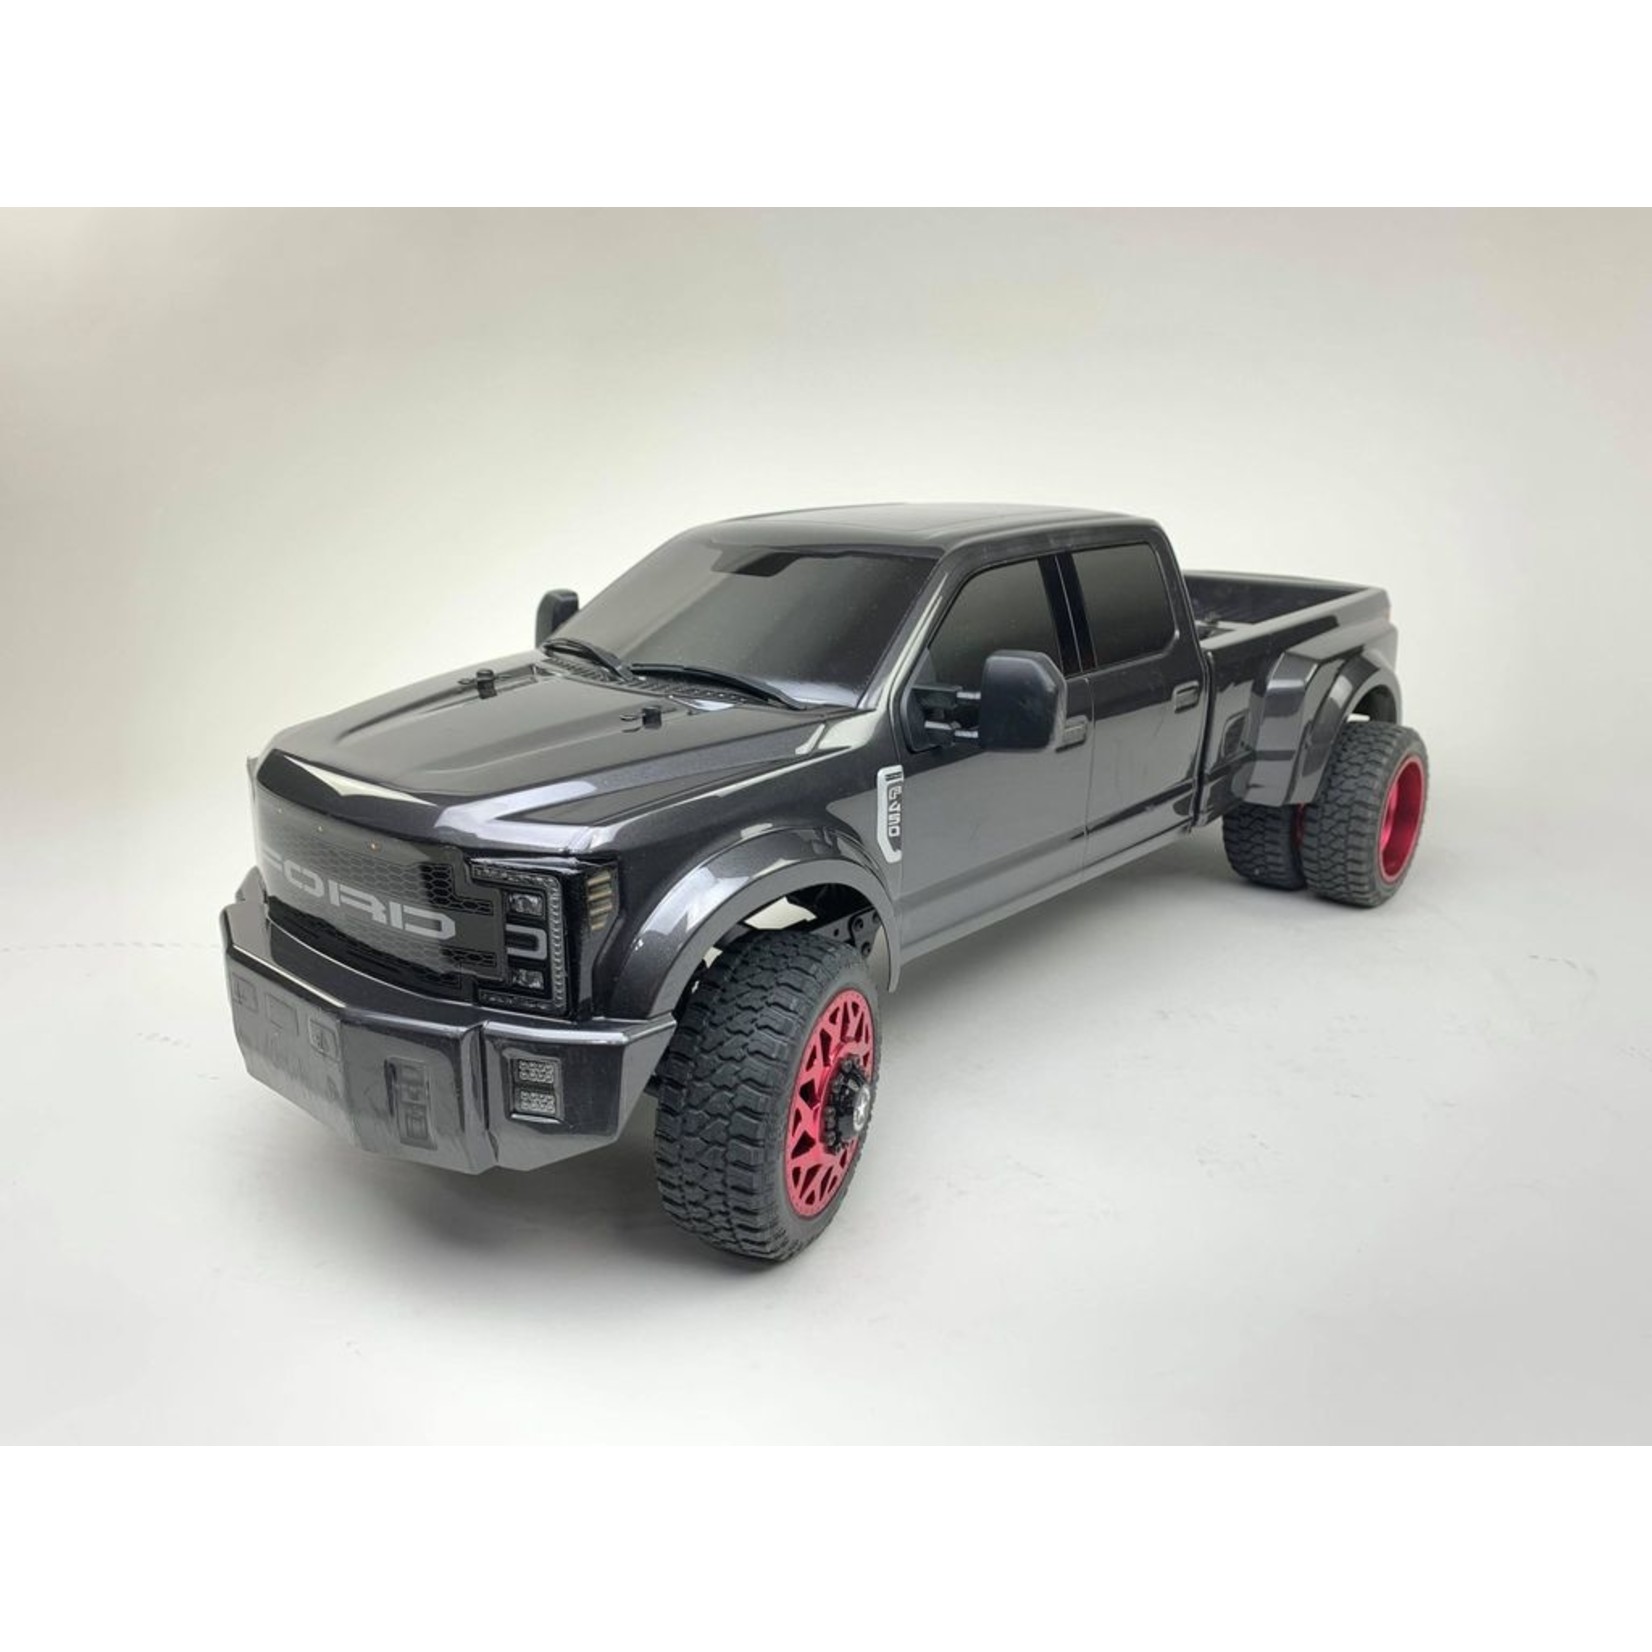 CEN Racing Ford F450 1/10 4WD Solid Axle RTR Truck - Grey